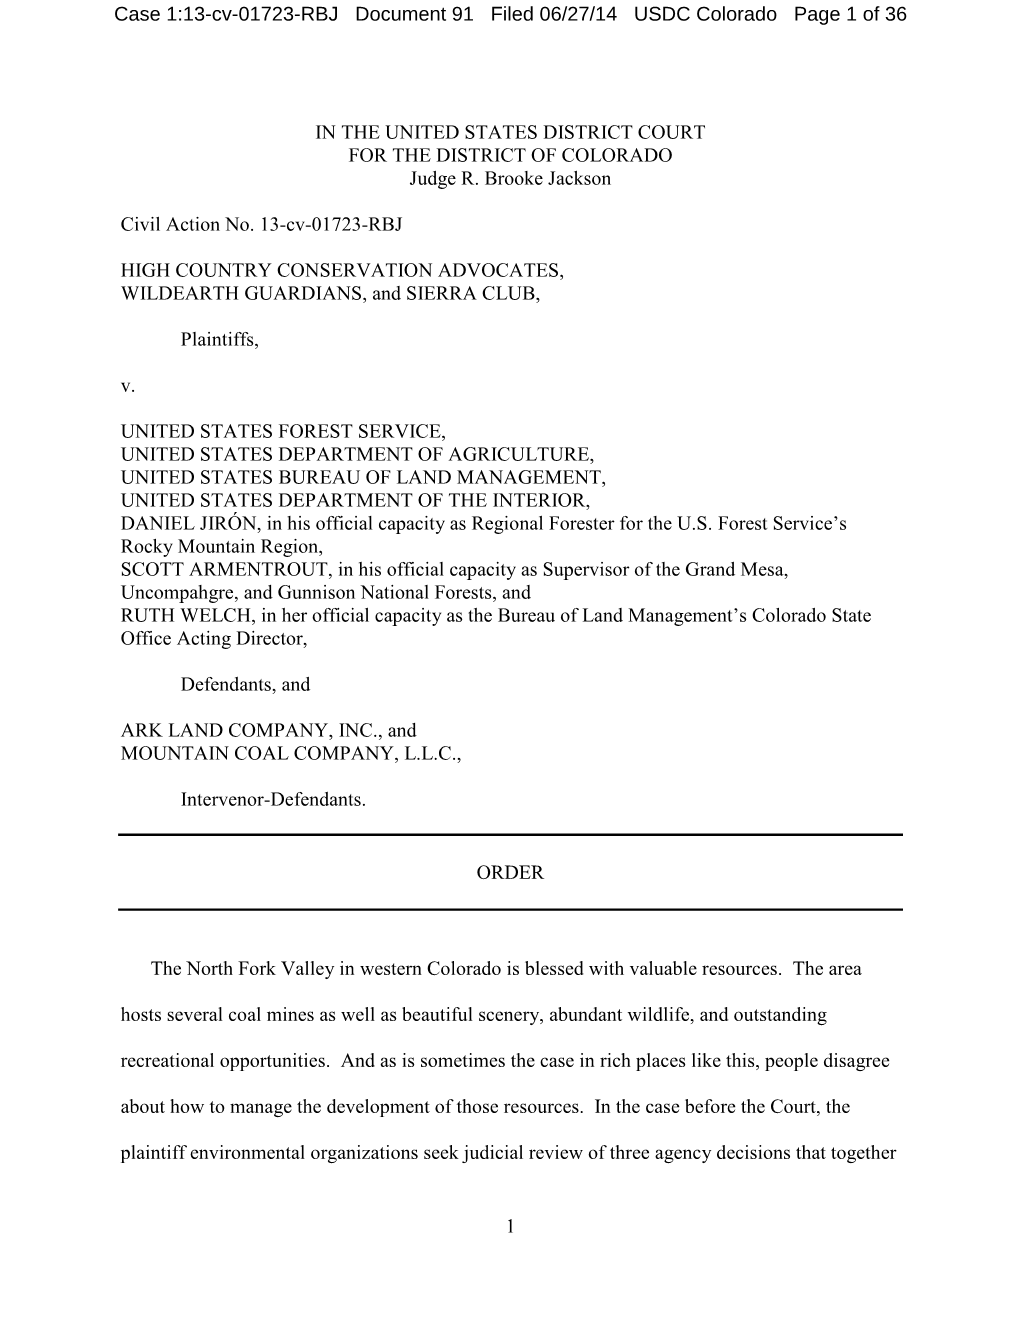 1:13-Cv-01723-RBJ Document 91 Filed 06/27/14 USDC Colorado Page 1 of 36